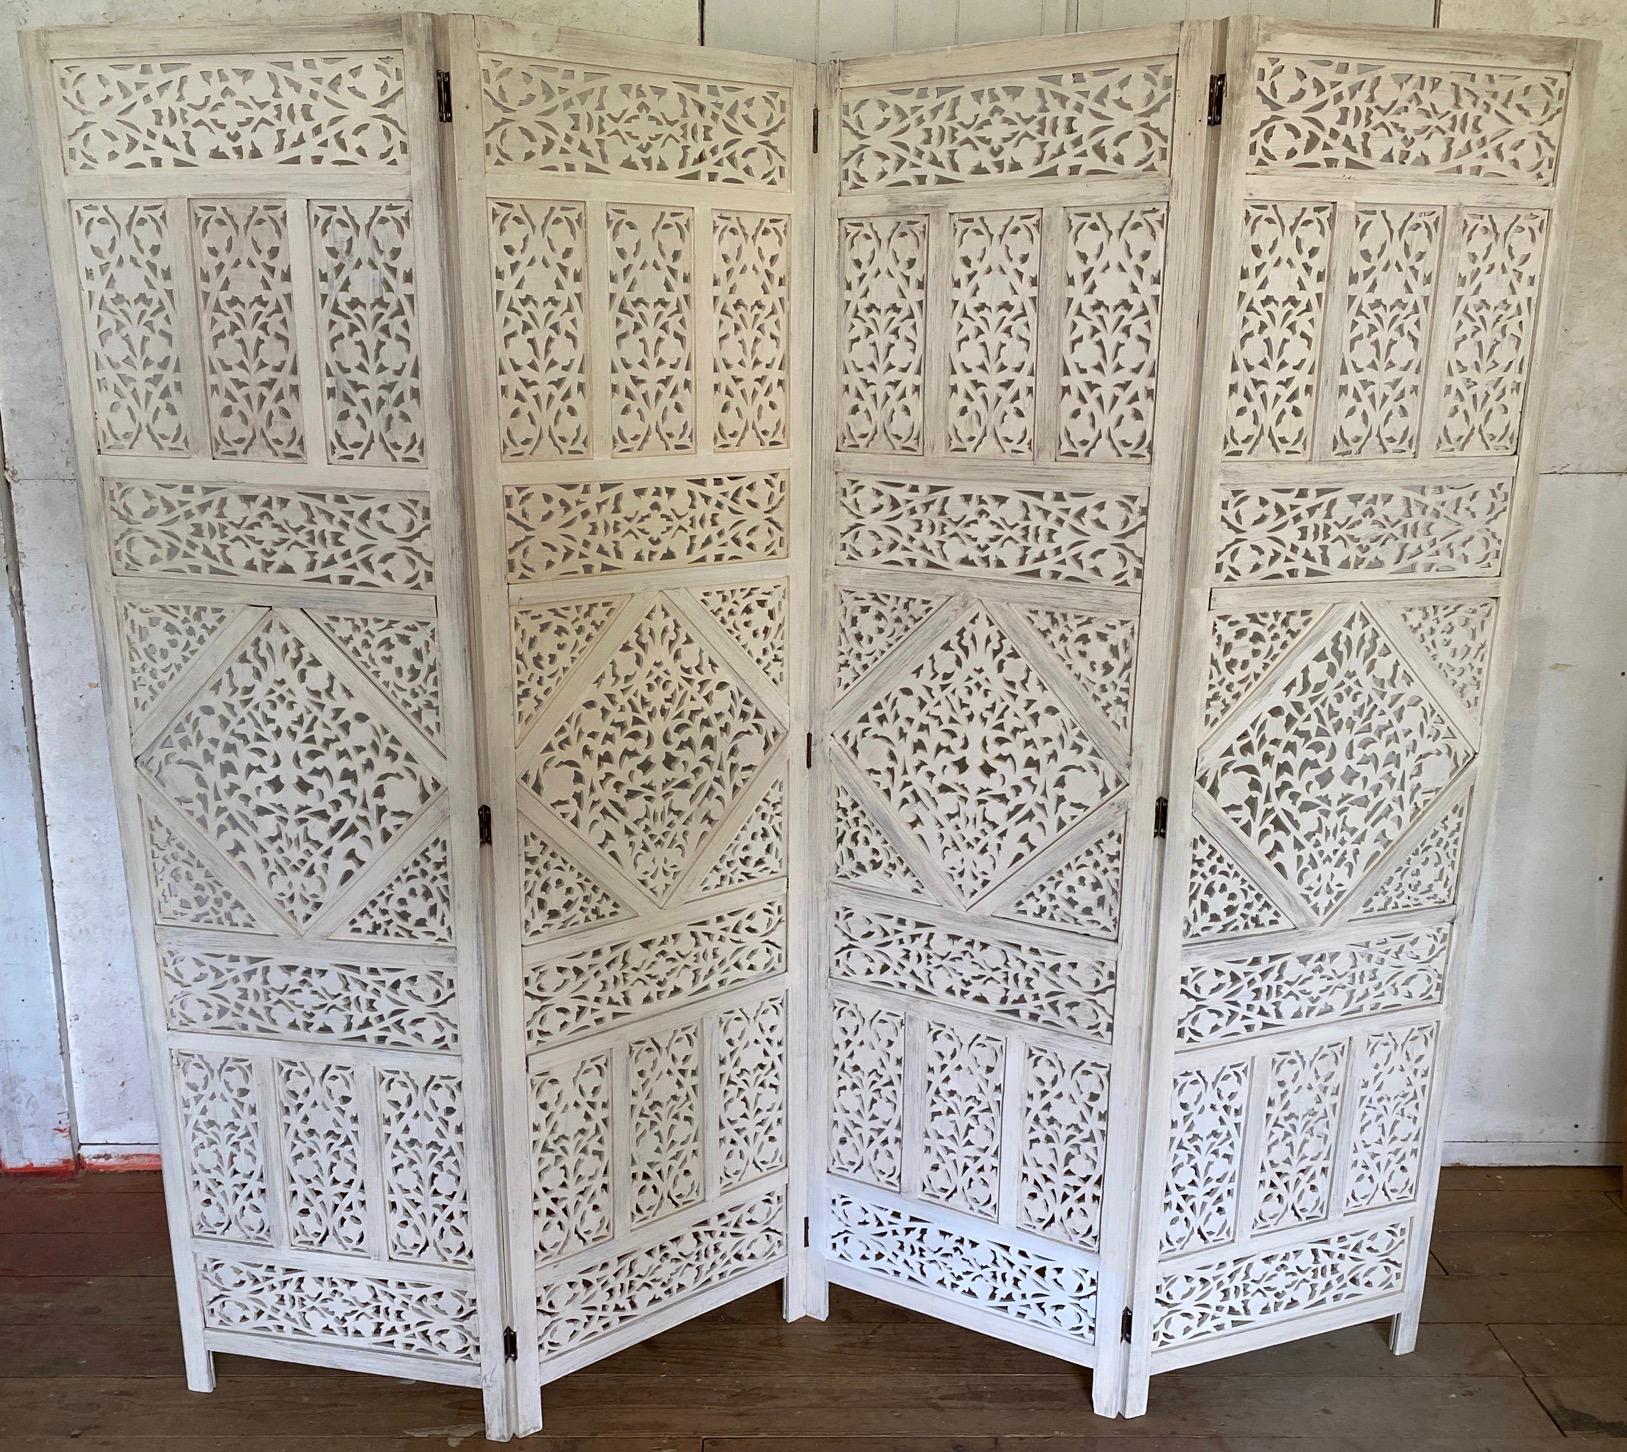 White washed Anglo-Indian 4 panel folding screen or room divider. Elaborately carved wood screen from the early 20th century. This screen is covered with stunningly intricate hand carved details, a great example of the Indian carving mastery. 
Use